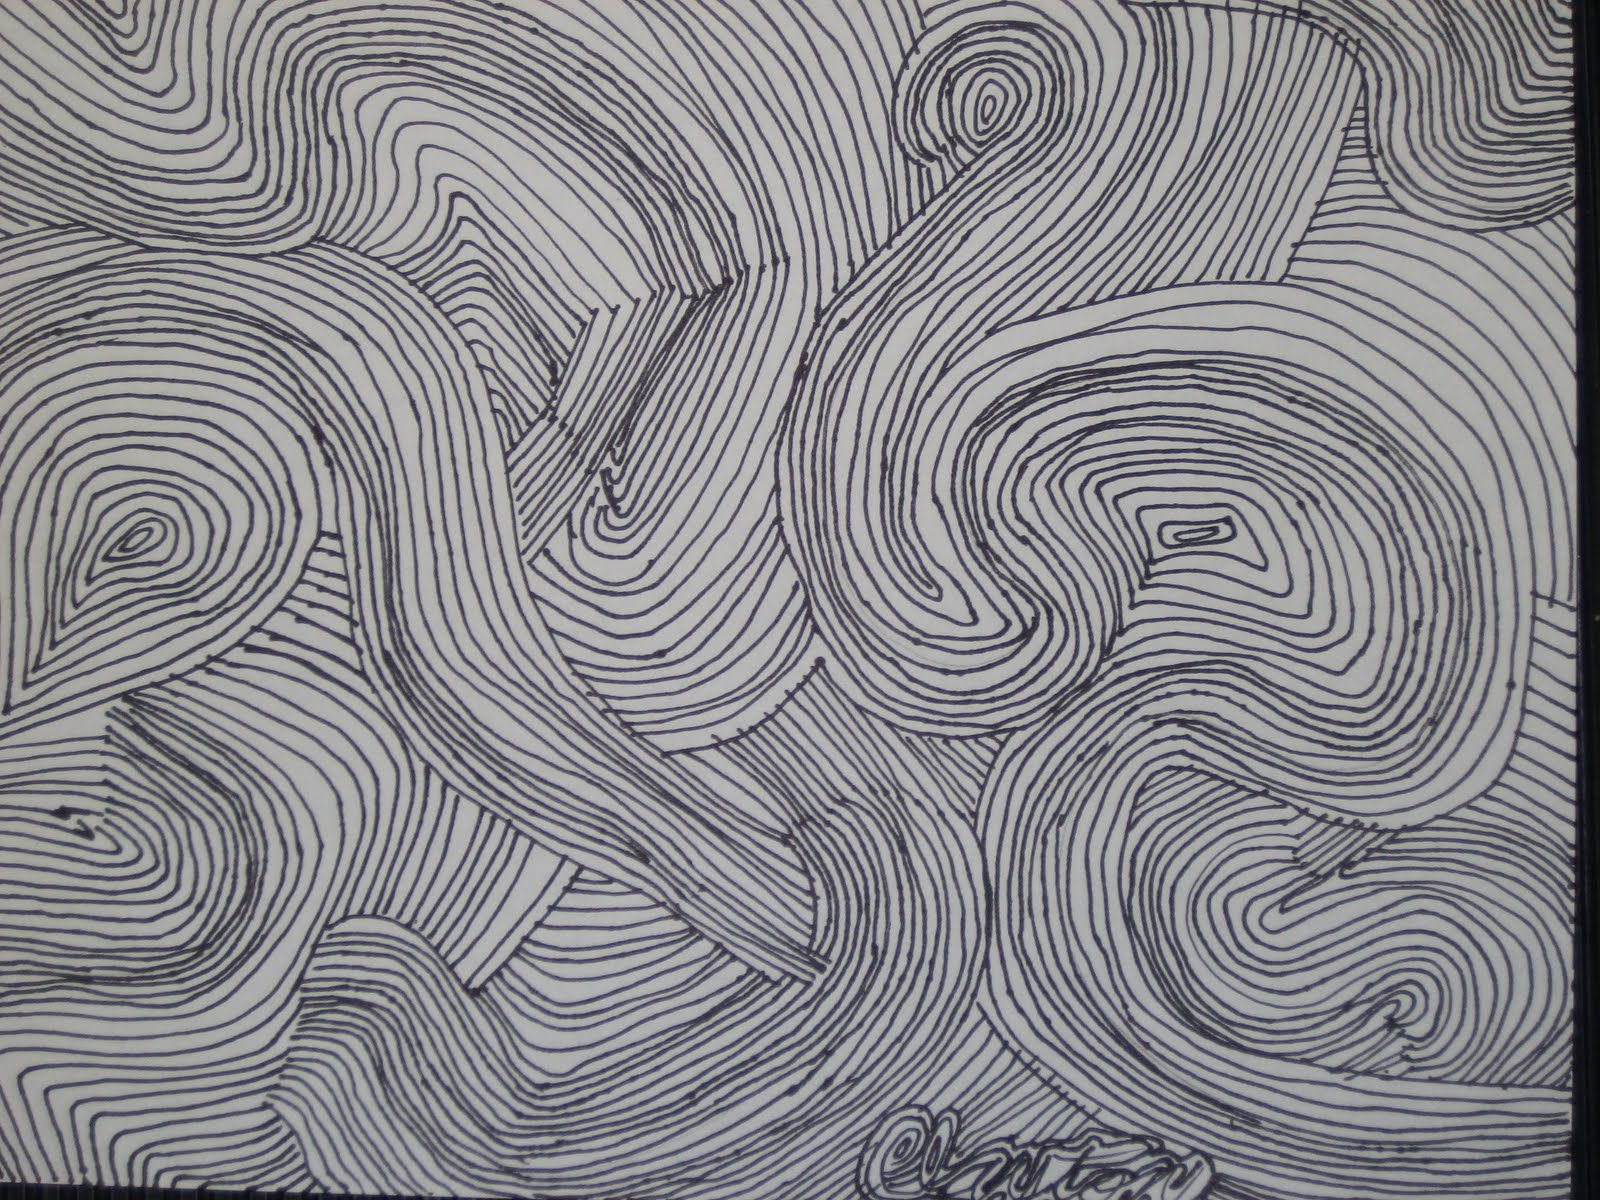 Mrs. Garber's Gallery: Surreal and Op Art by the Grade 4 & 5s